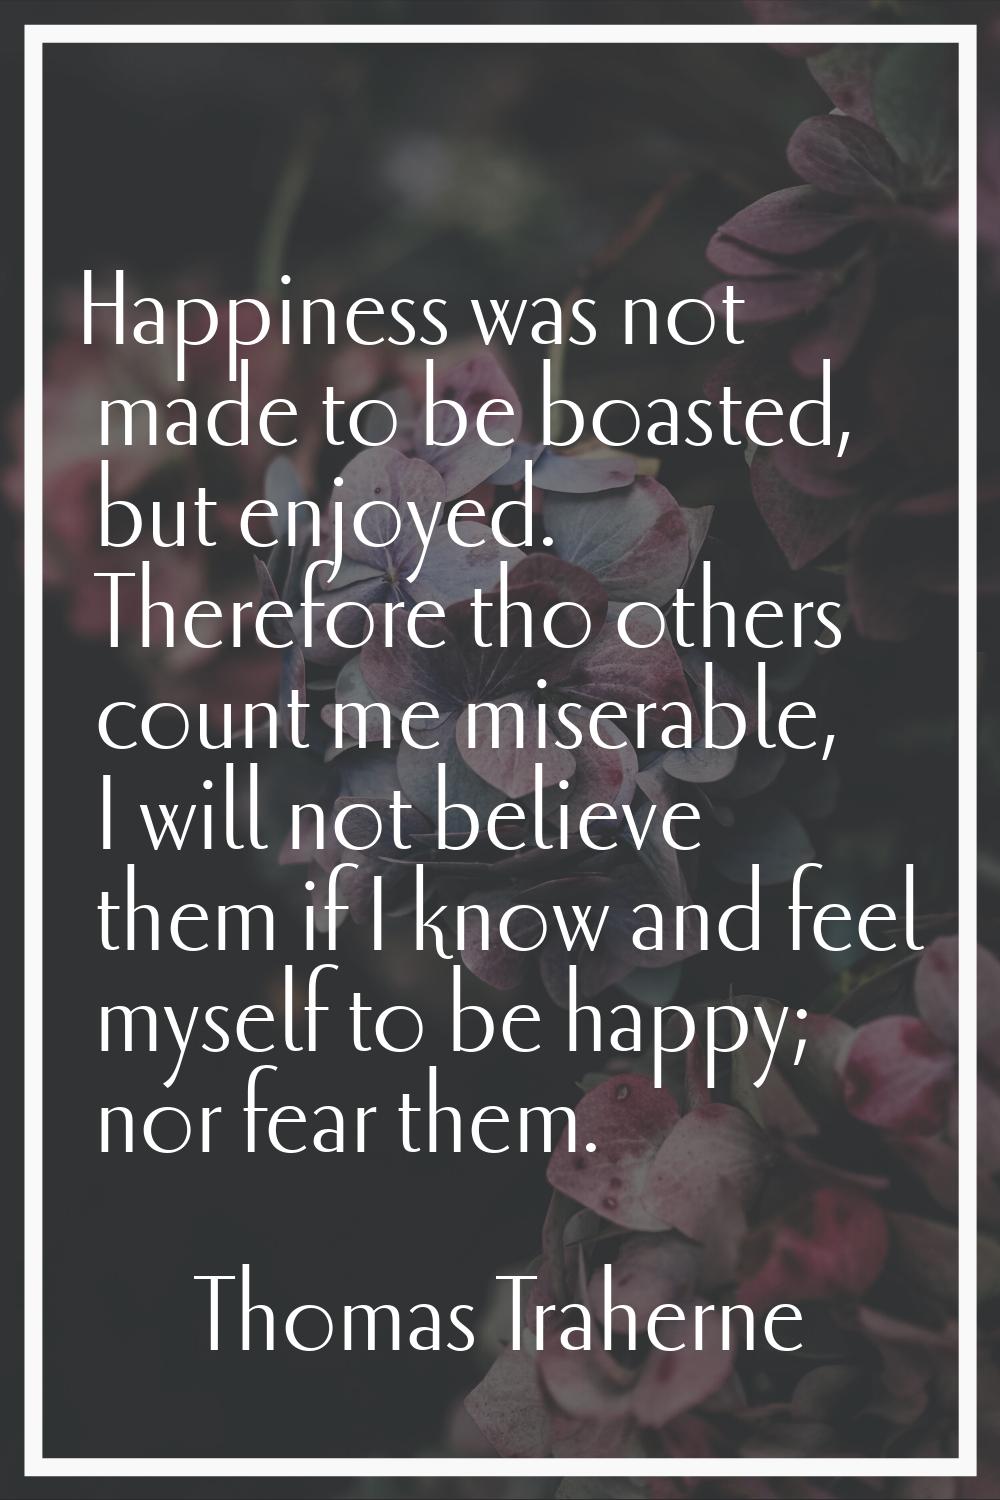 Happiness was not made to be boasted, but enjoyed. Therefore tho others count me miserable, I will 